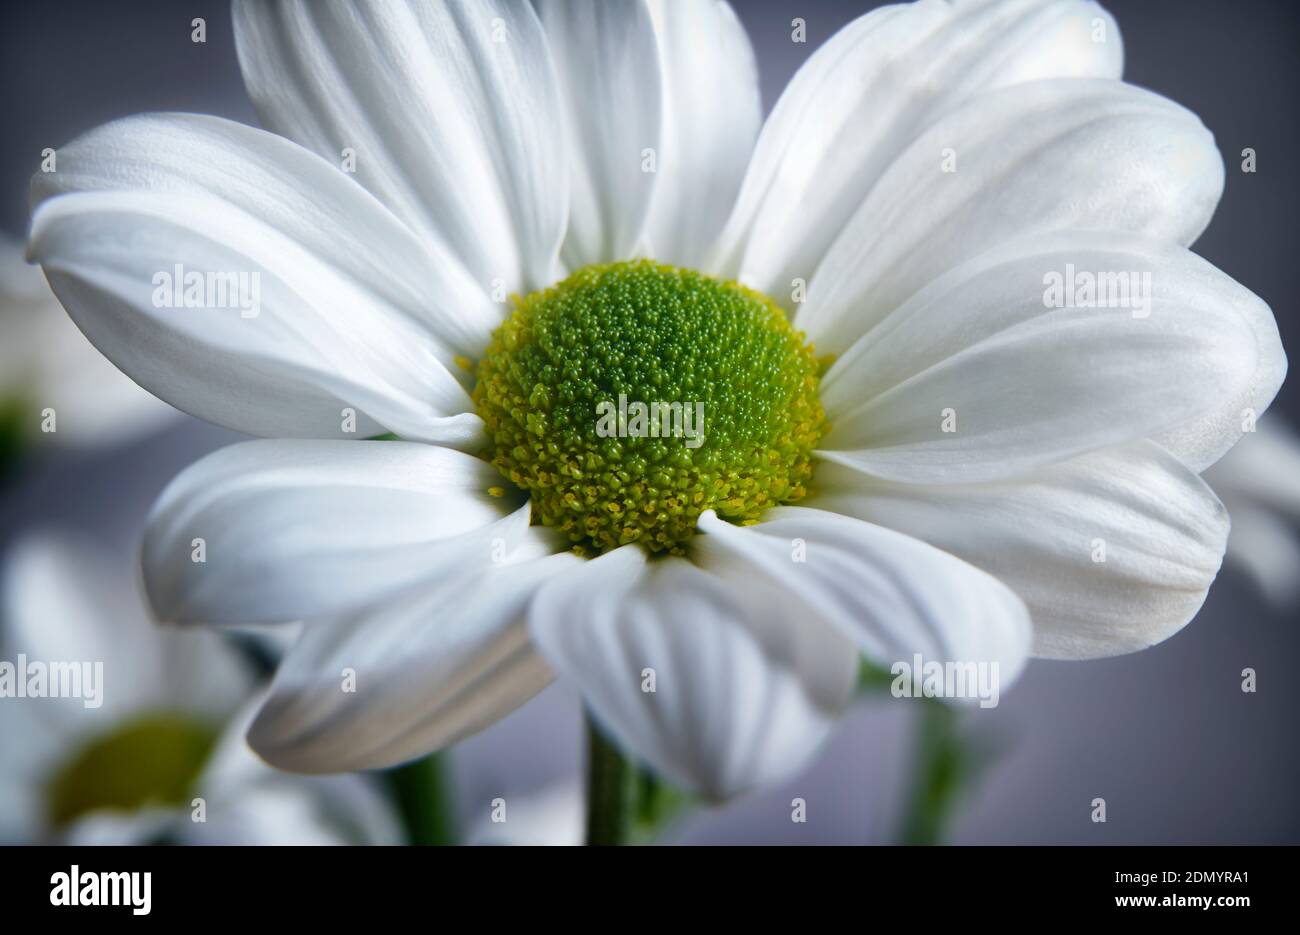 Close up photograph of white daisy gerbera flower showing the stamen and petals Stock Photo